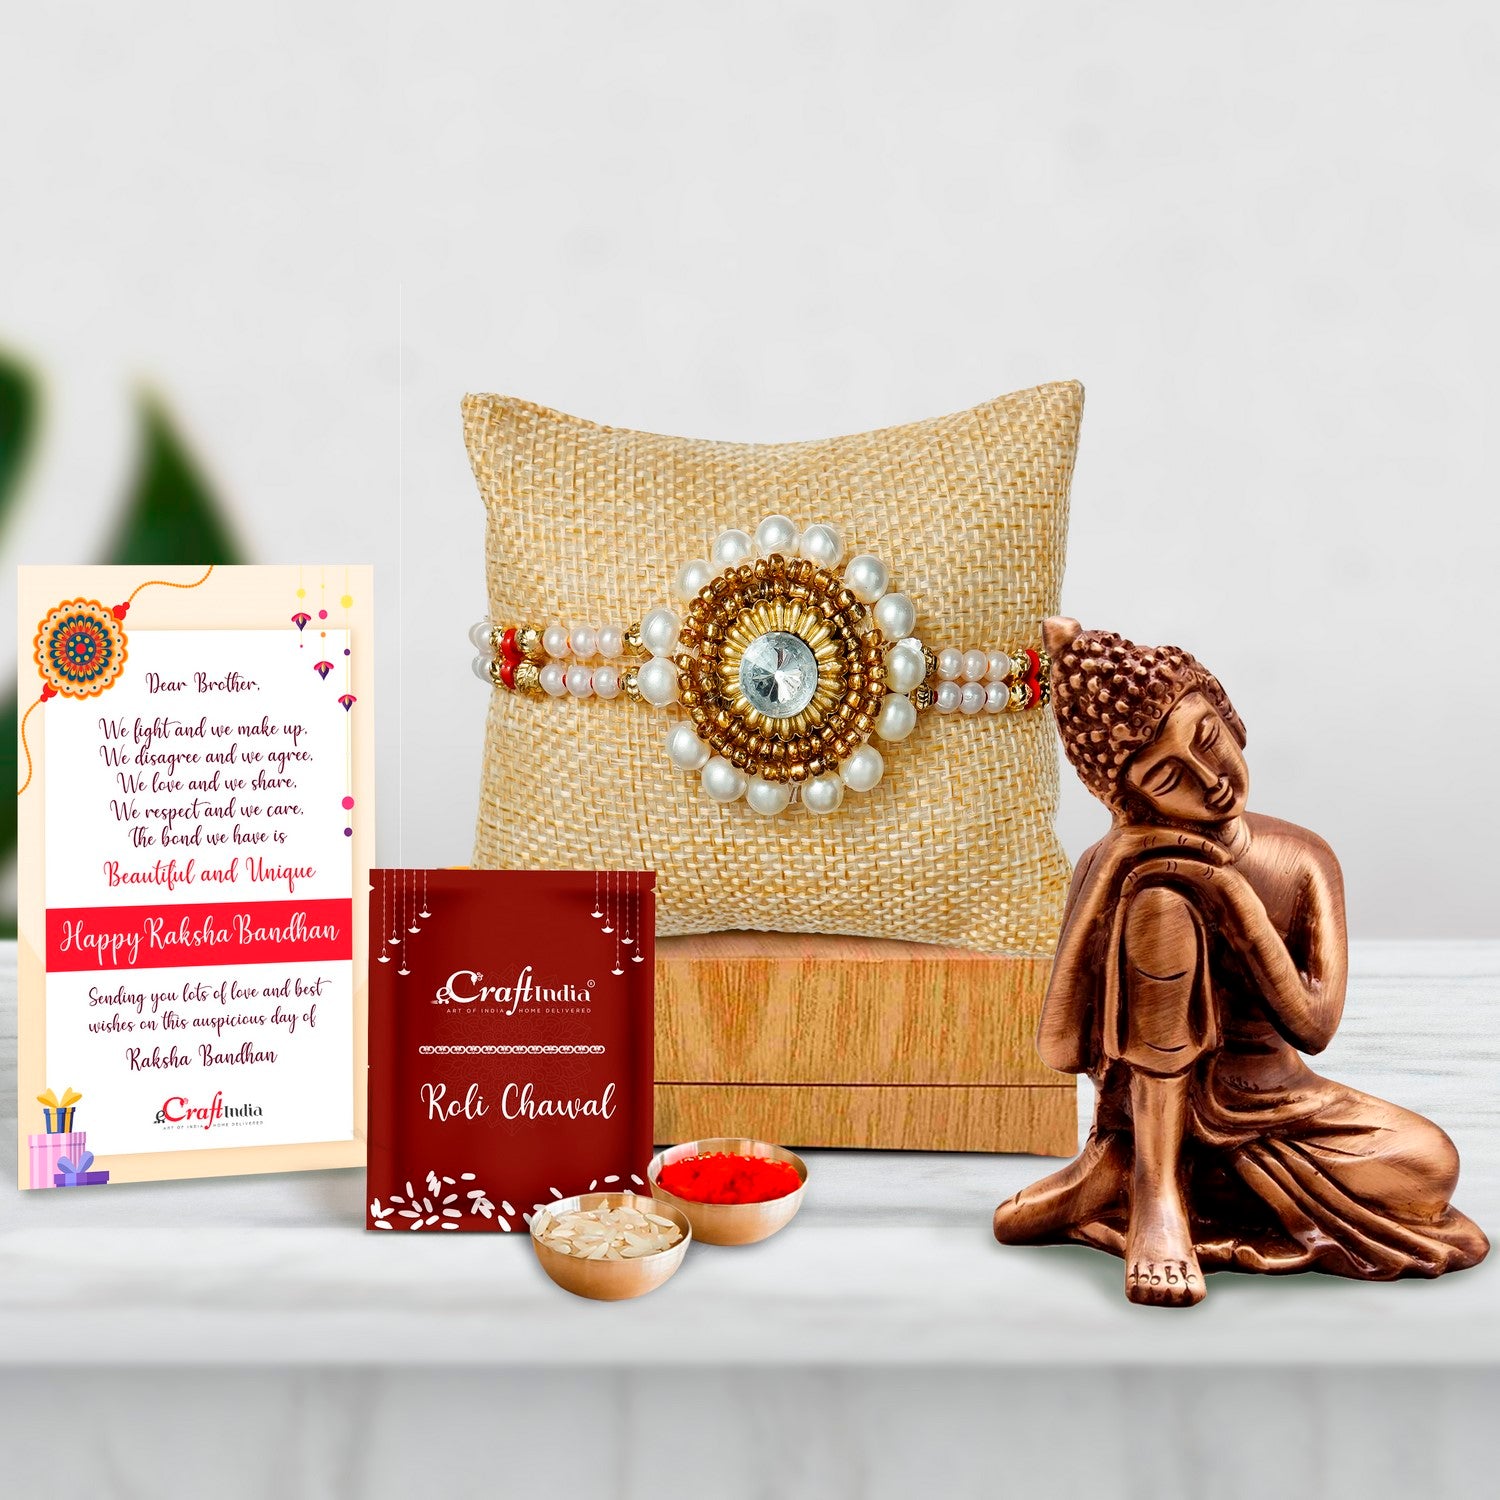 Designer Handcrafted Stone Pearl Rakhi with Brass Buddha Resting Antique Artifact and Roli Chawal Pack, Best Wishes Greeting Card